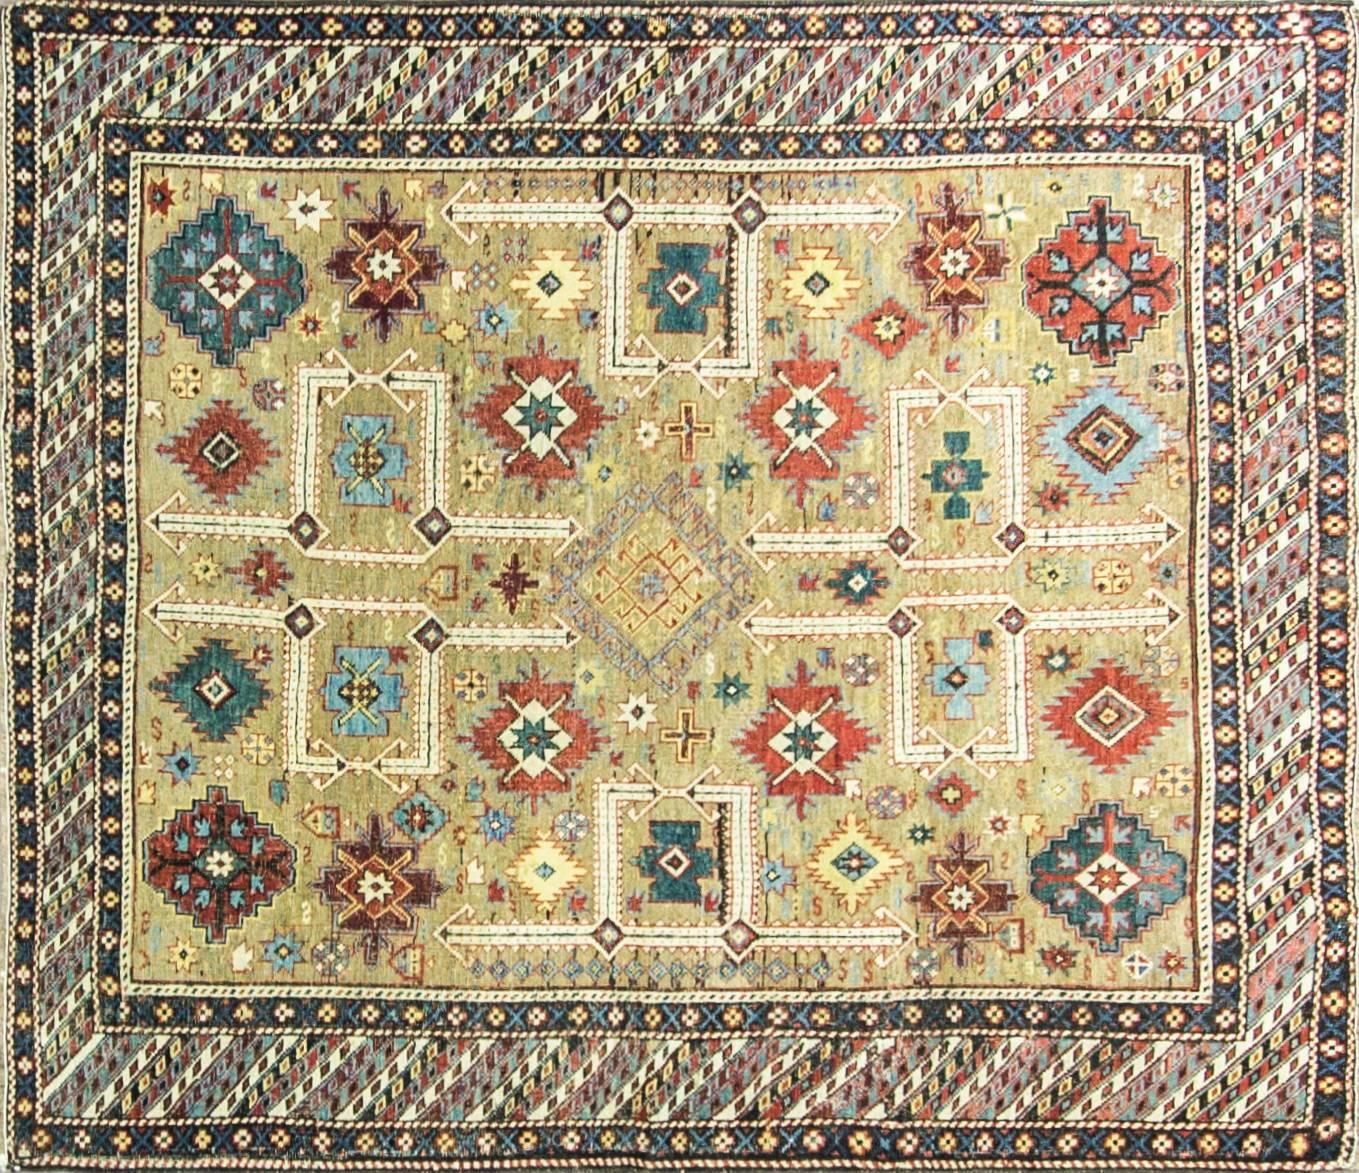 The historic Khanate or administrative district of Shirvan produced many highly decorative antique rugs that have a formality and stylistic complexity that is found in few rugs from the Caucasus. The depth of colors, the complexity of the